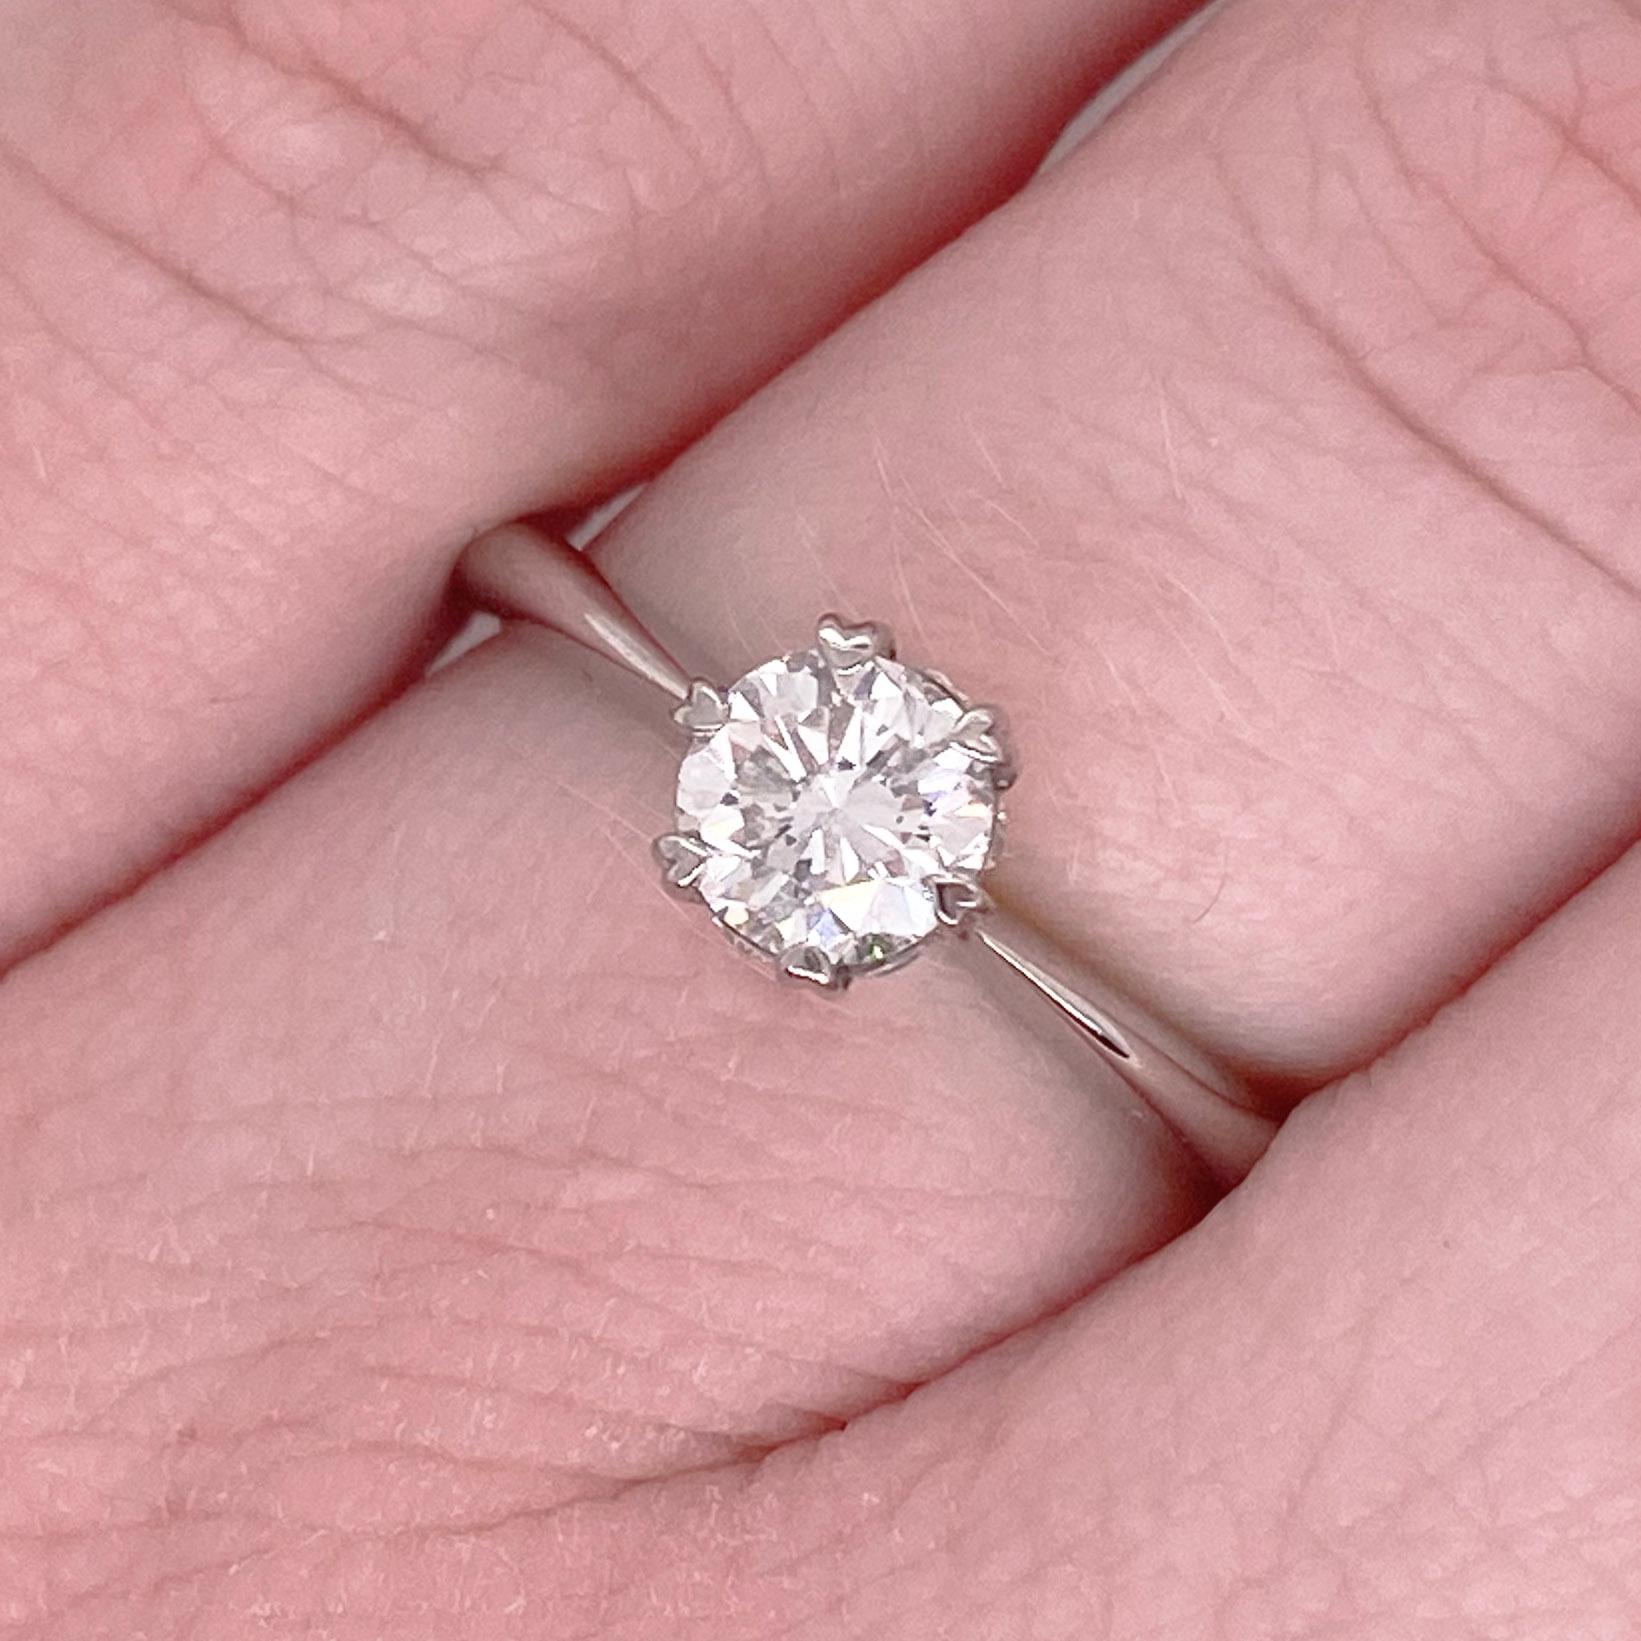 Gorgeous round brilliant cut diamond solitaire engagement ring! This gorgeous center diamond is set in six heart shaped prongs with a hidden halo. The platinum engagement ring is the perfect compliment to this stunning round diamond. Very stunning